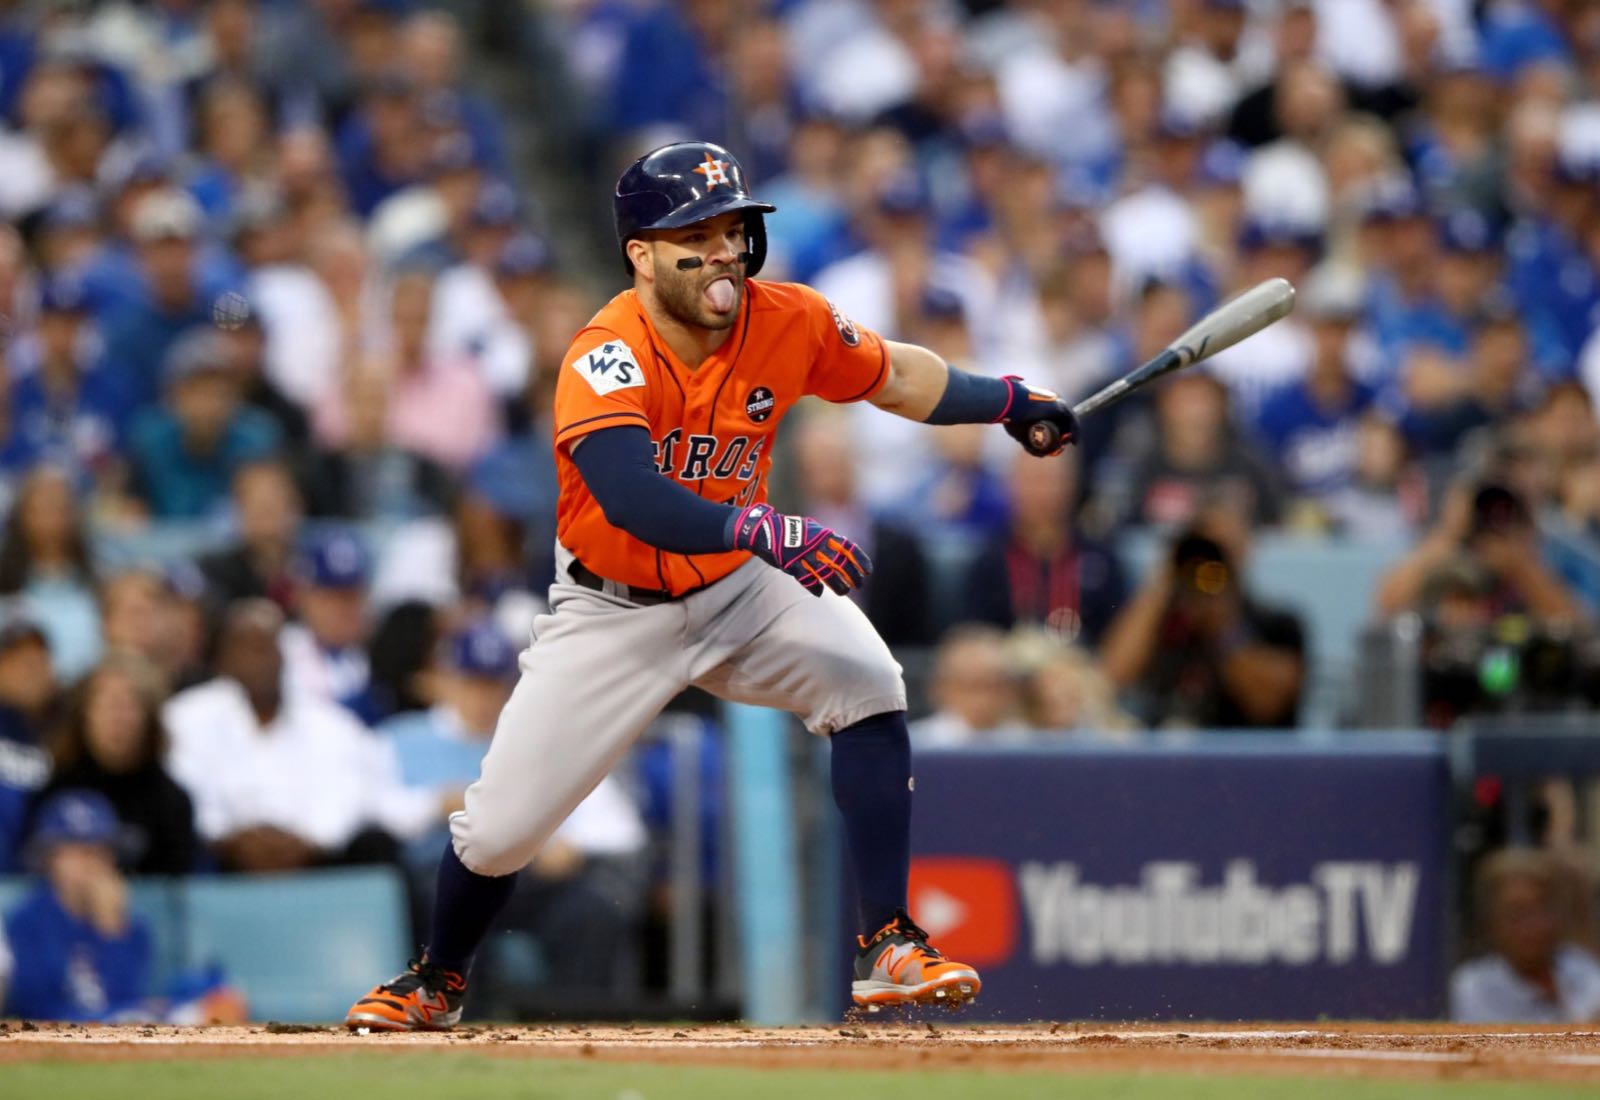 Astros star Jose Altuve named AP Male Athlete of the Year